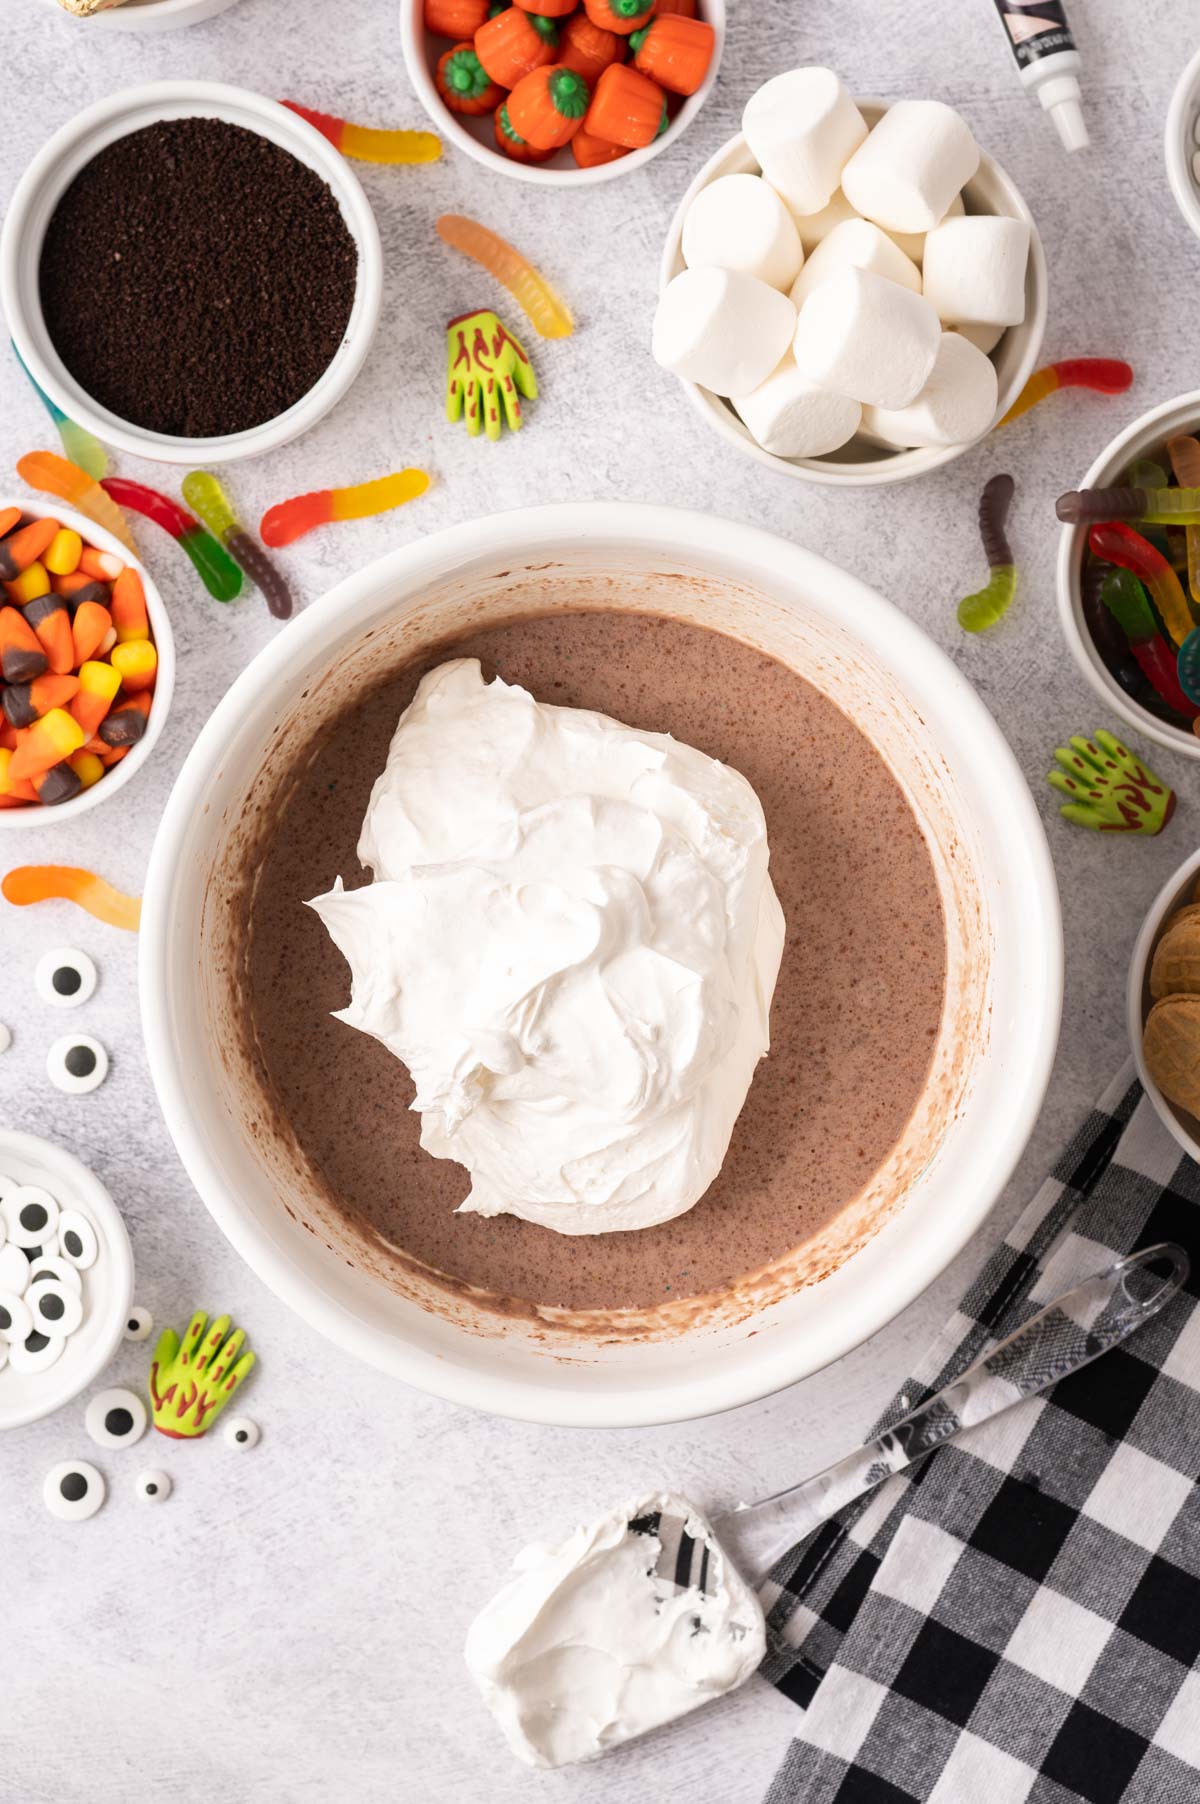 Fold cool whip into pudding mixture